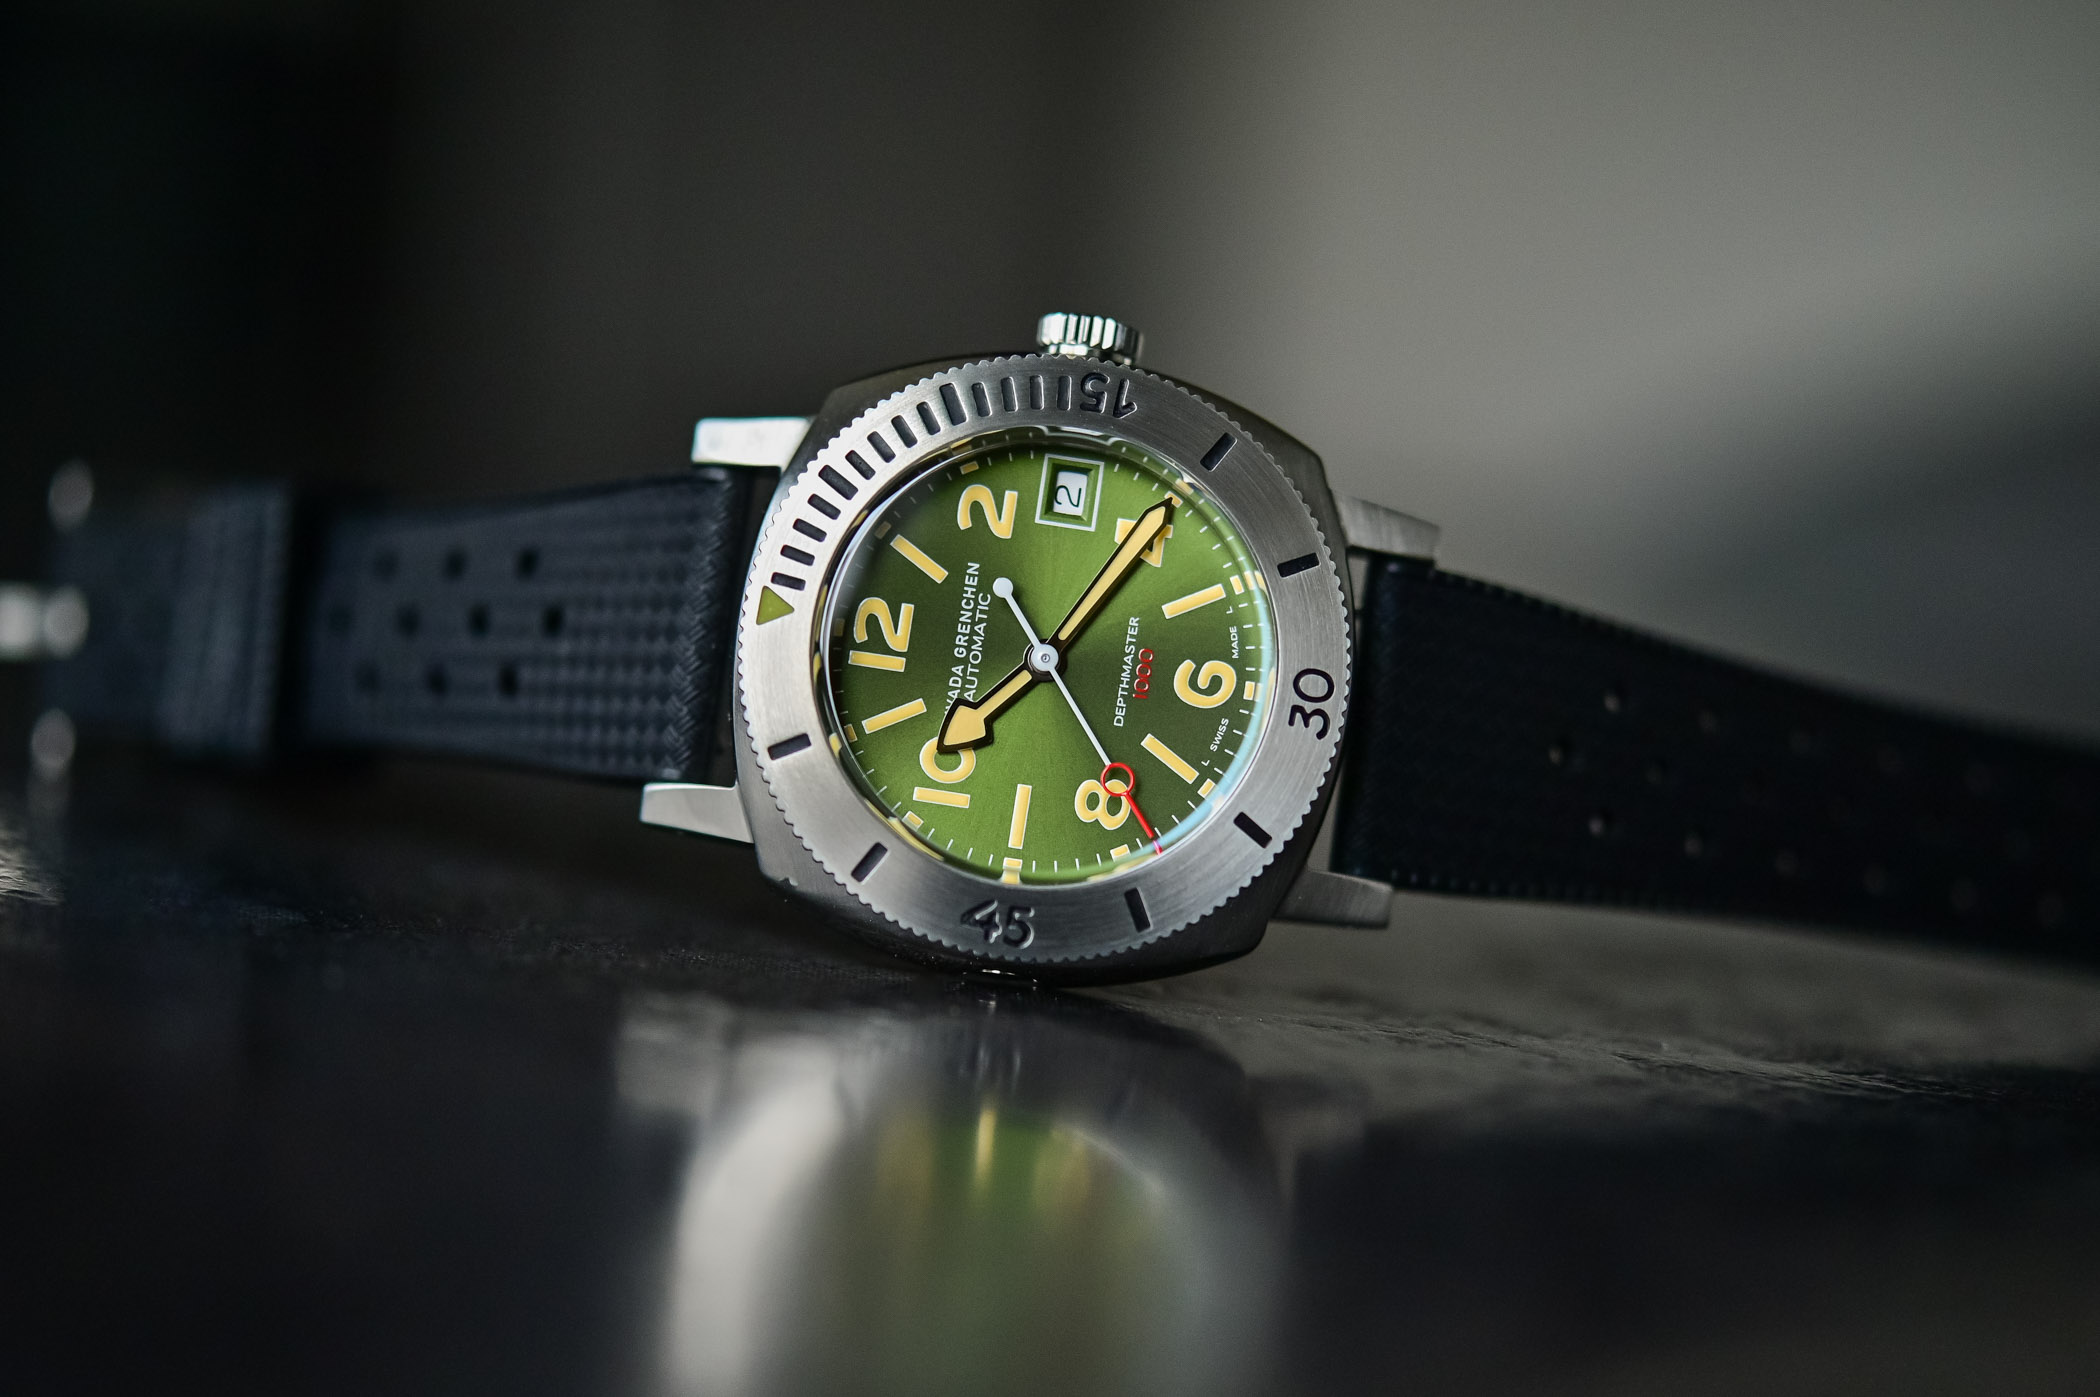 Nivada Grenchen Depthmaster Green Numerals Date 14103A09 - value proposition dive watch